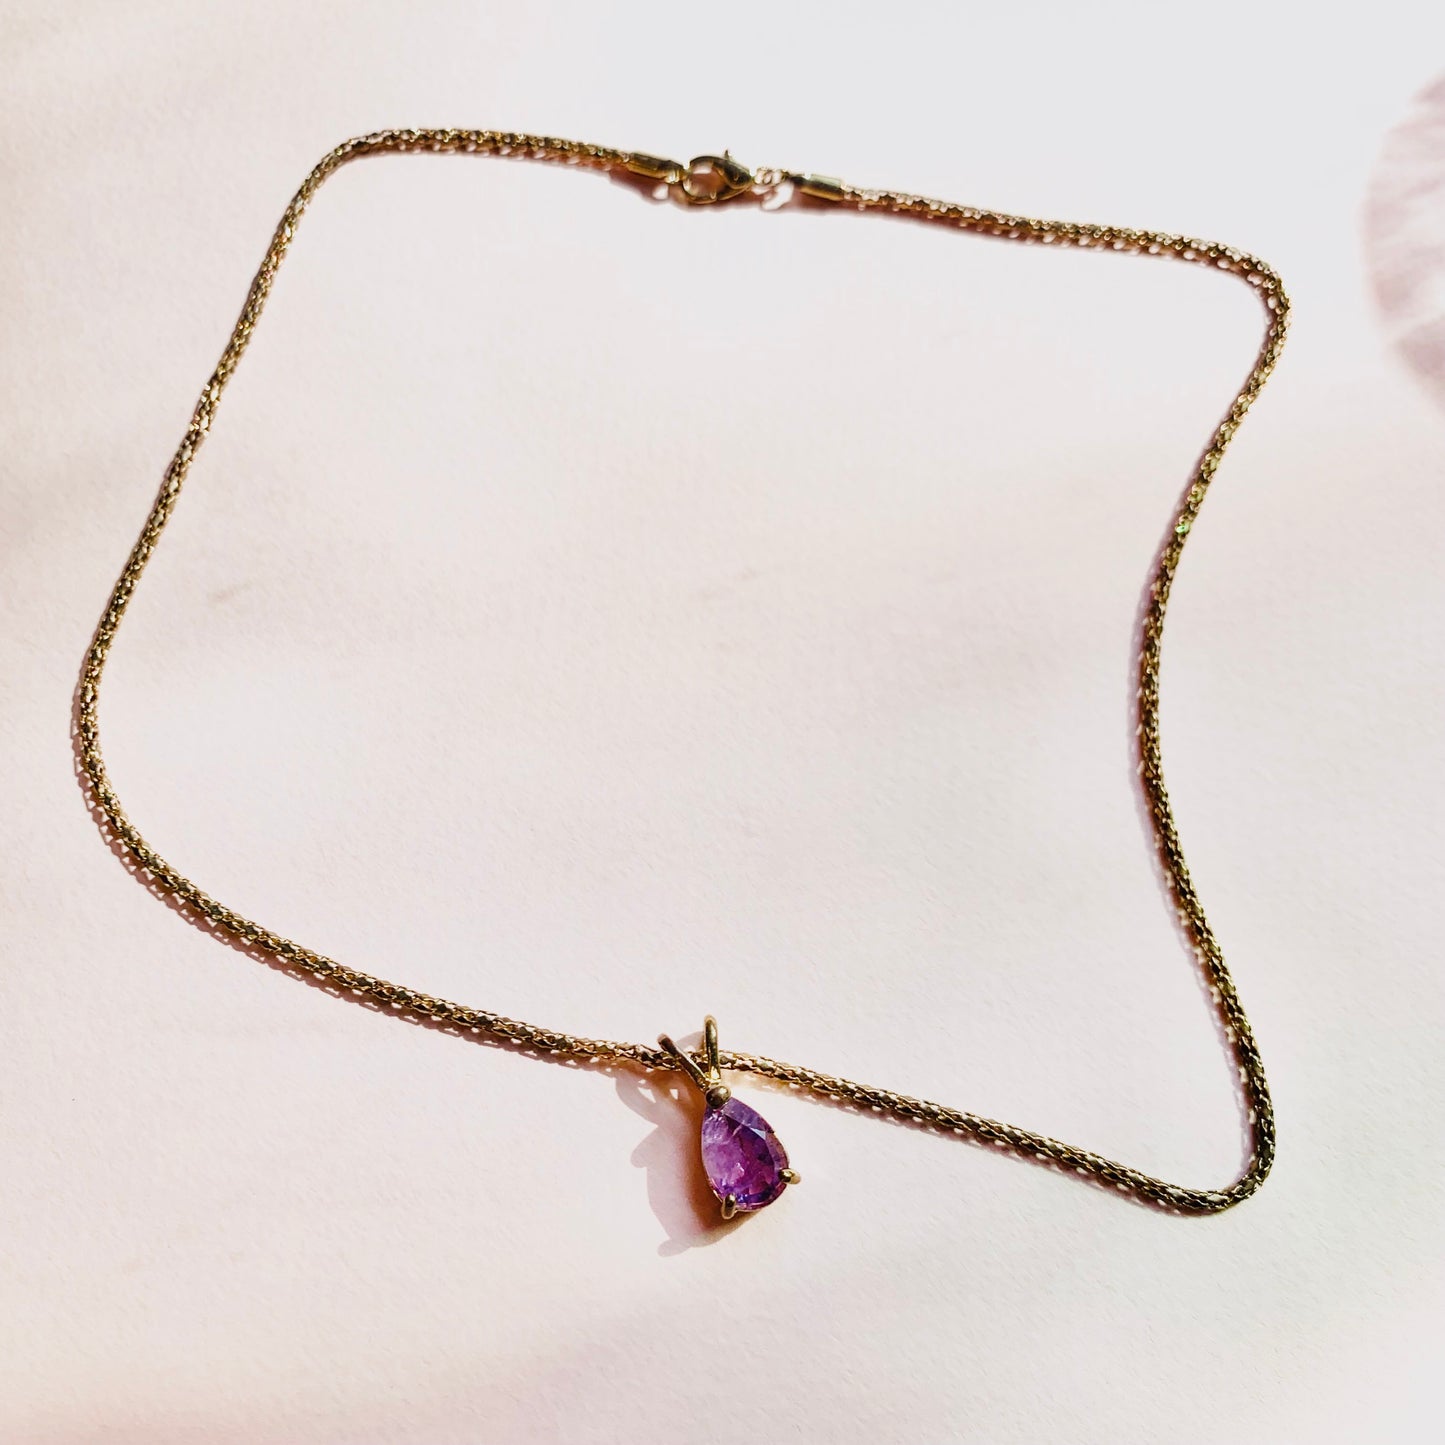 1970s Anson American triple plated gold necklace with amethyst pendant